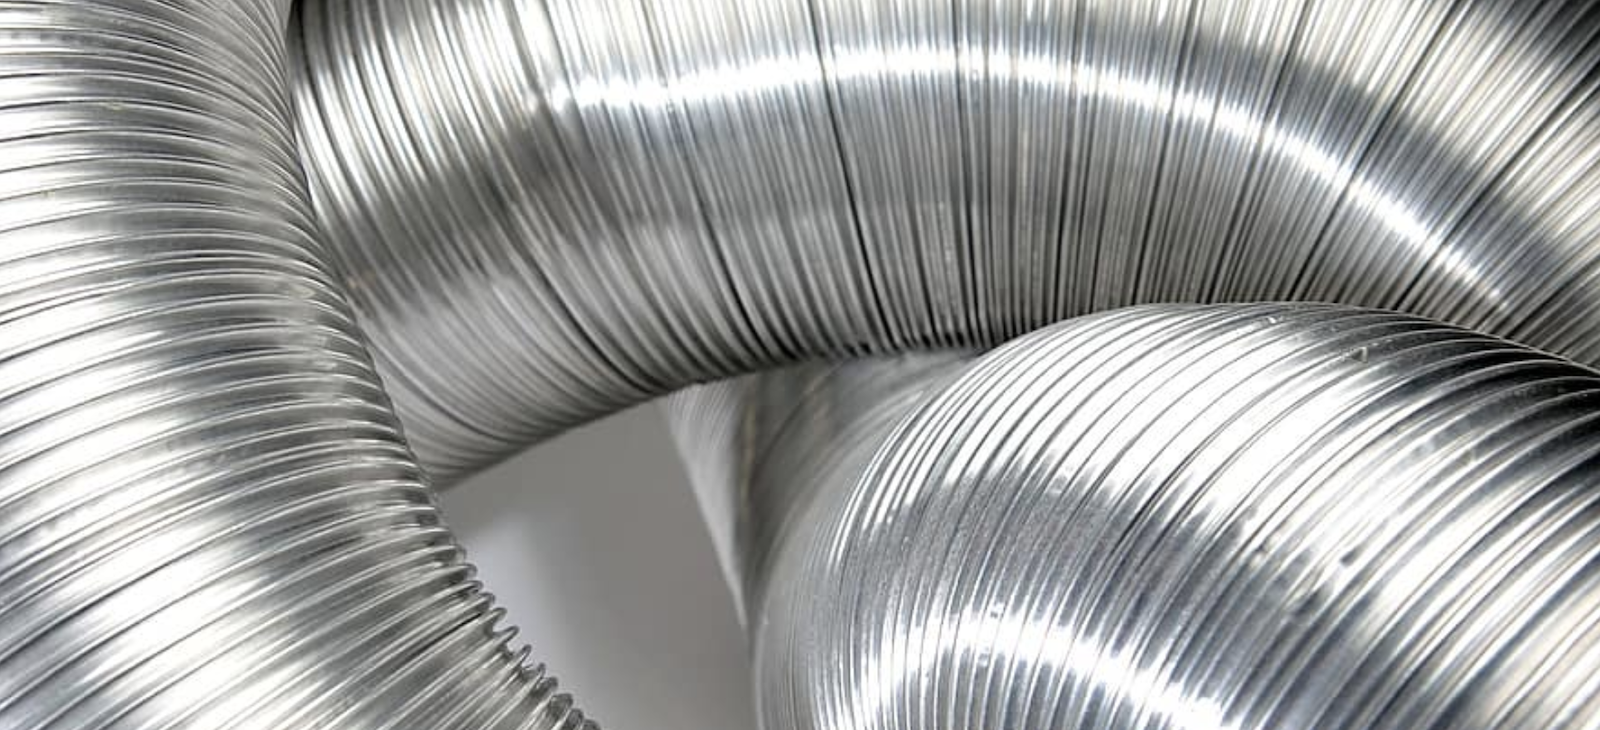 Flexible ducting for HVAC system